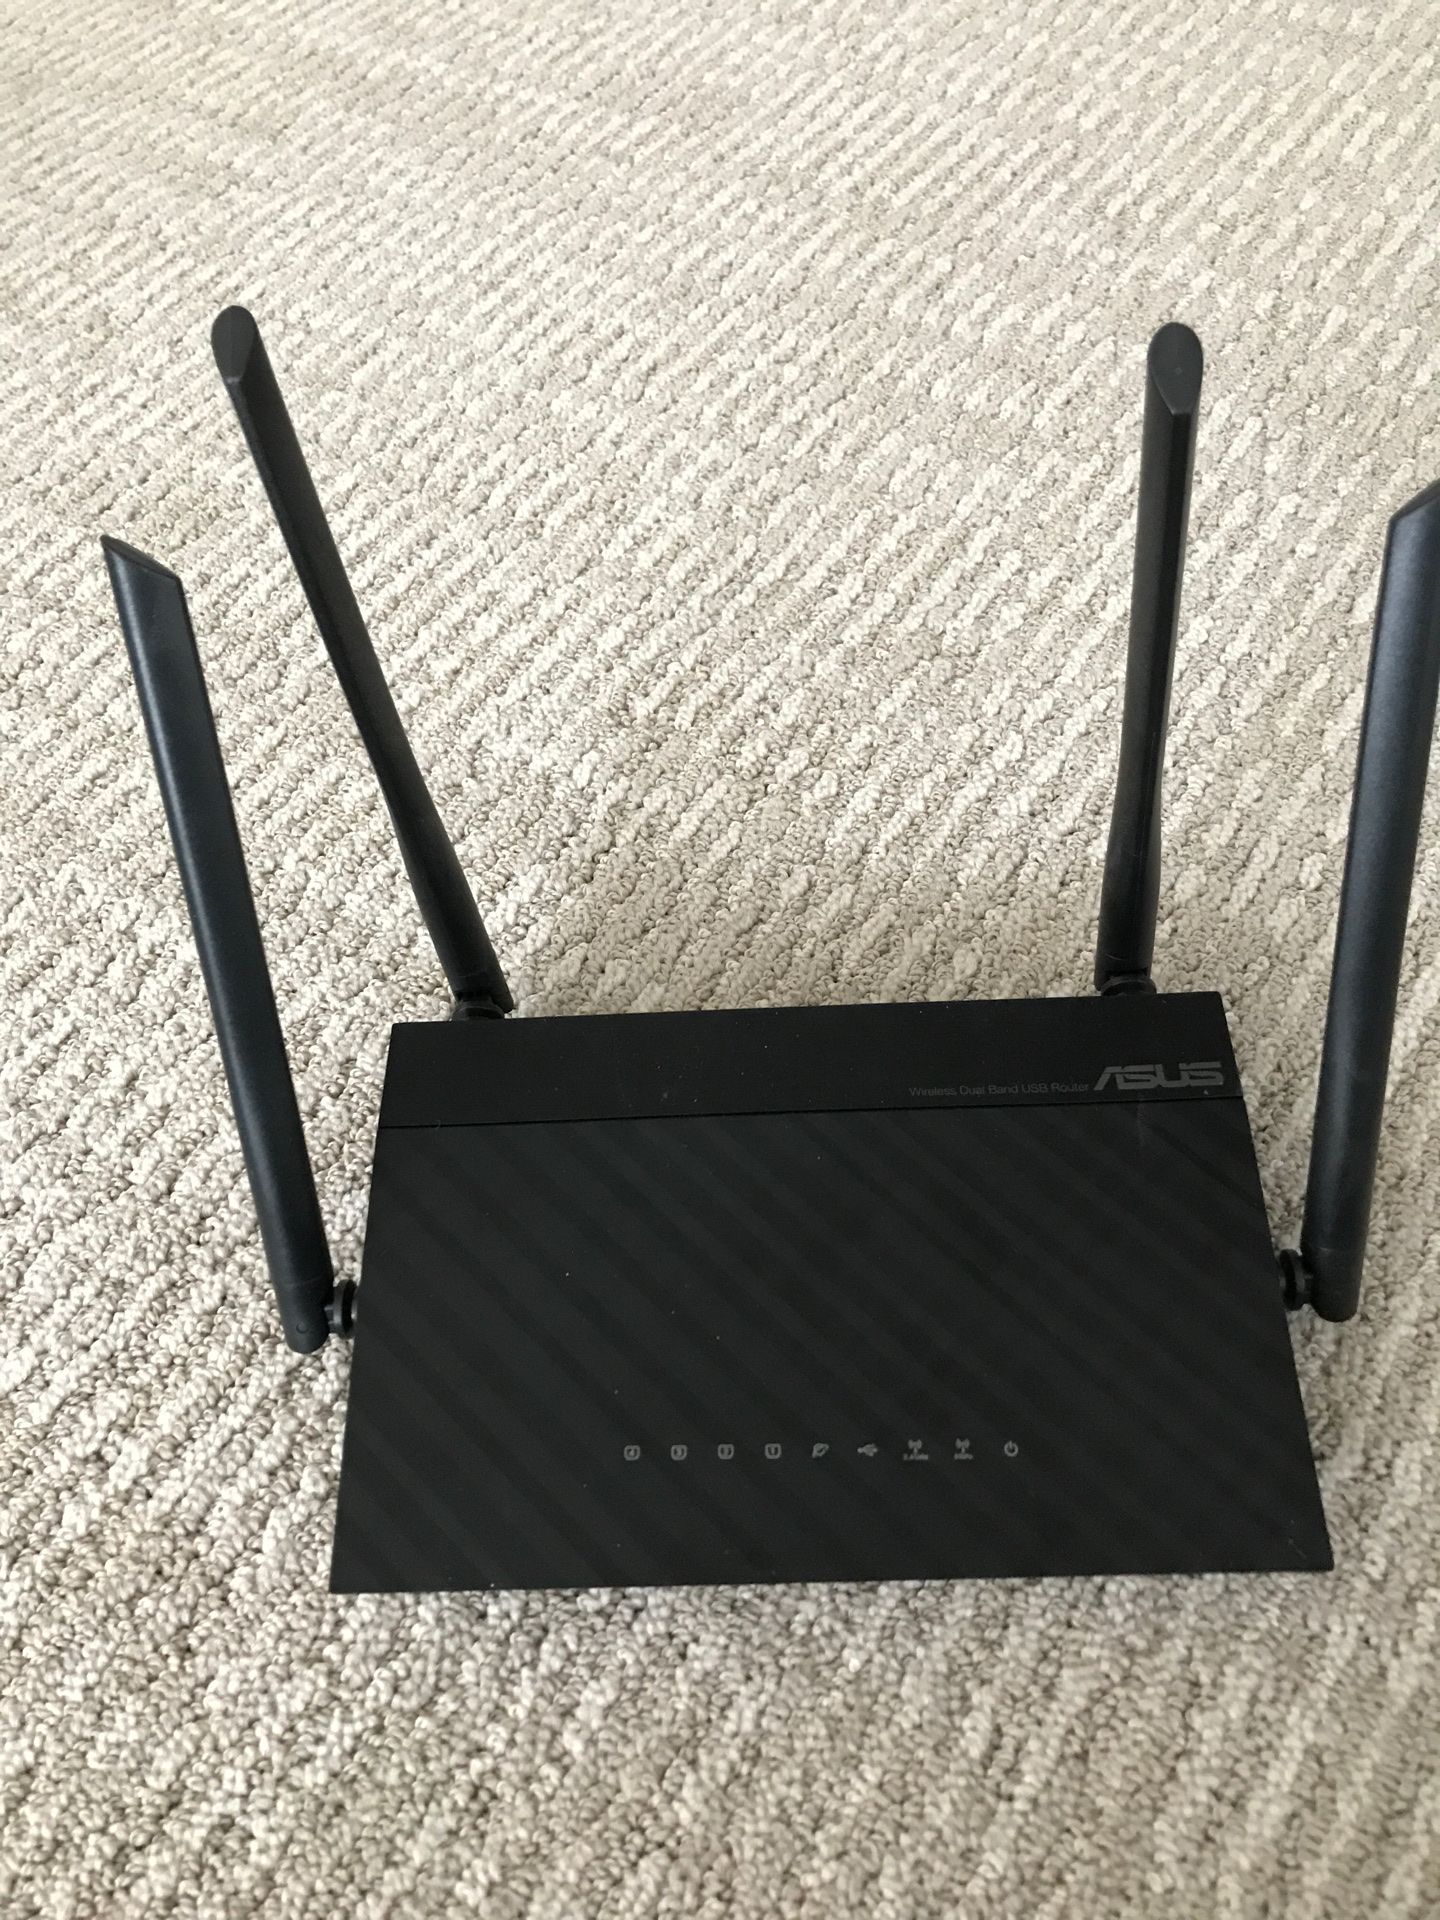 Asus RT-AC1200 WiFi Router